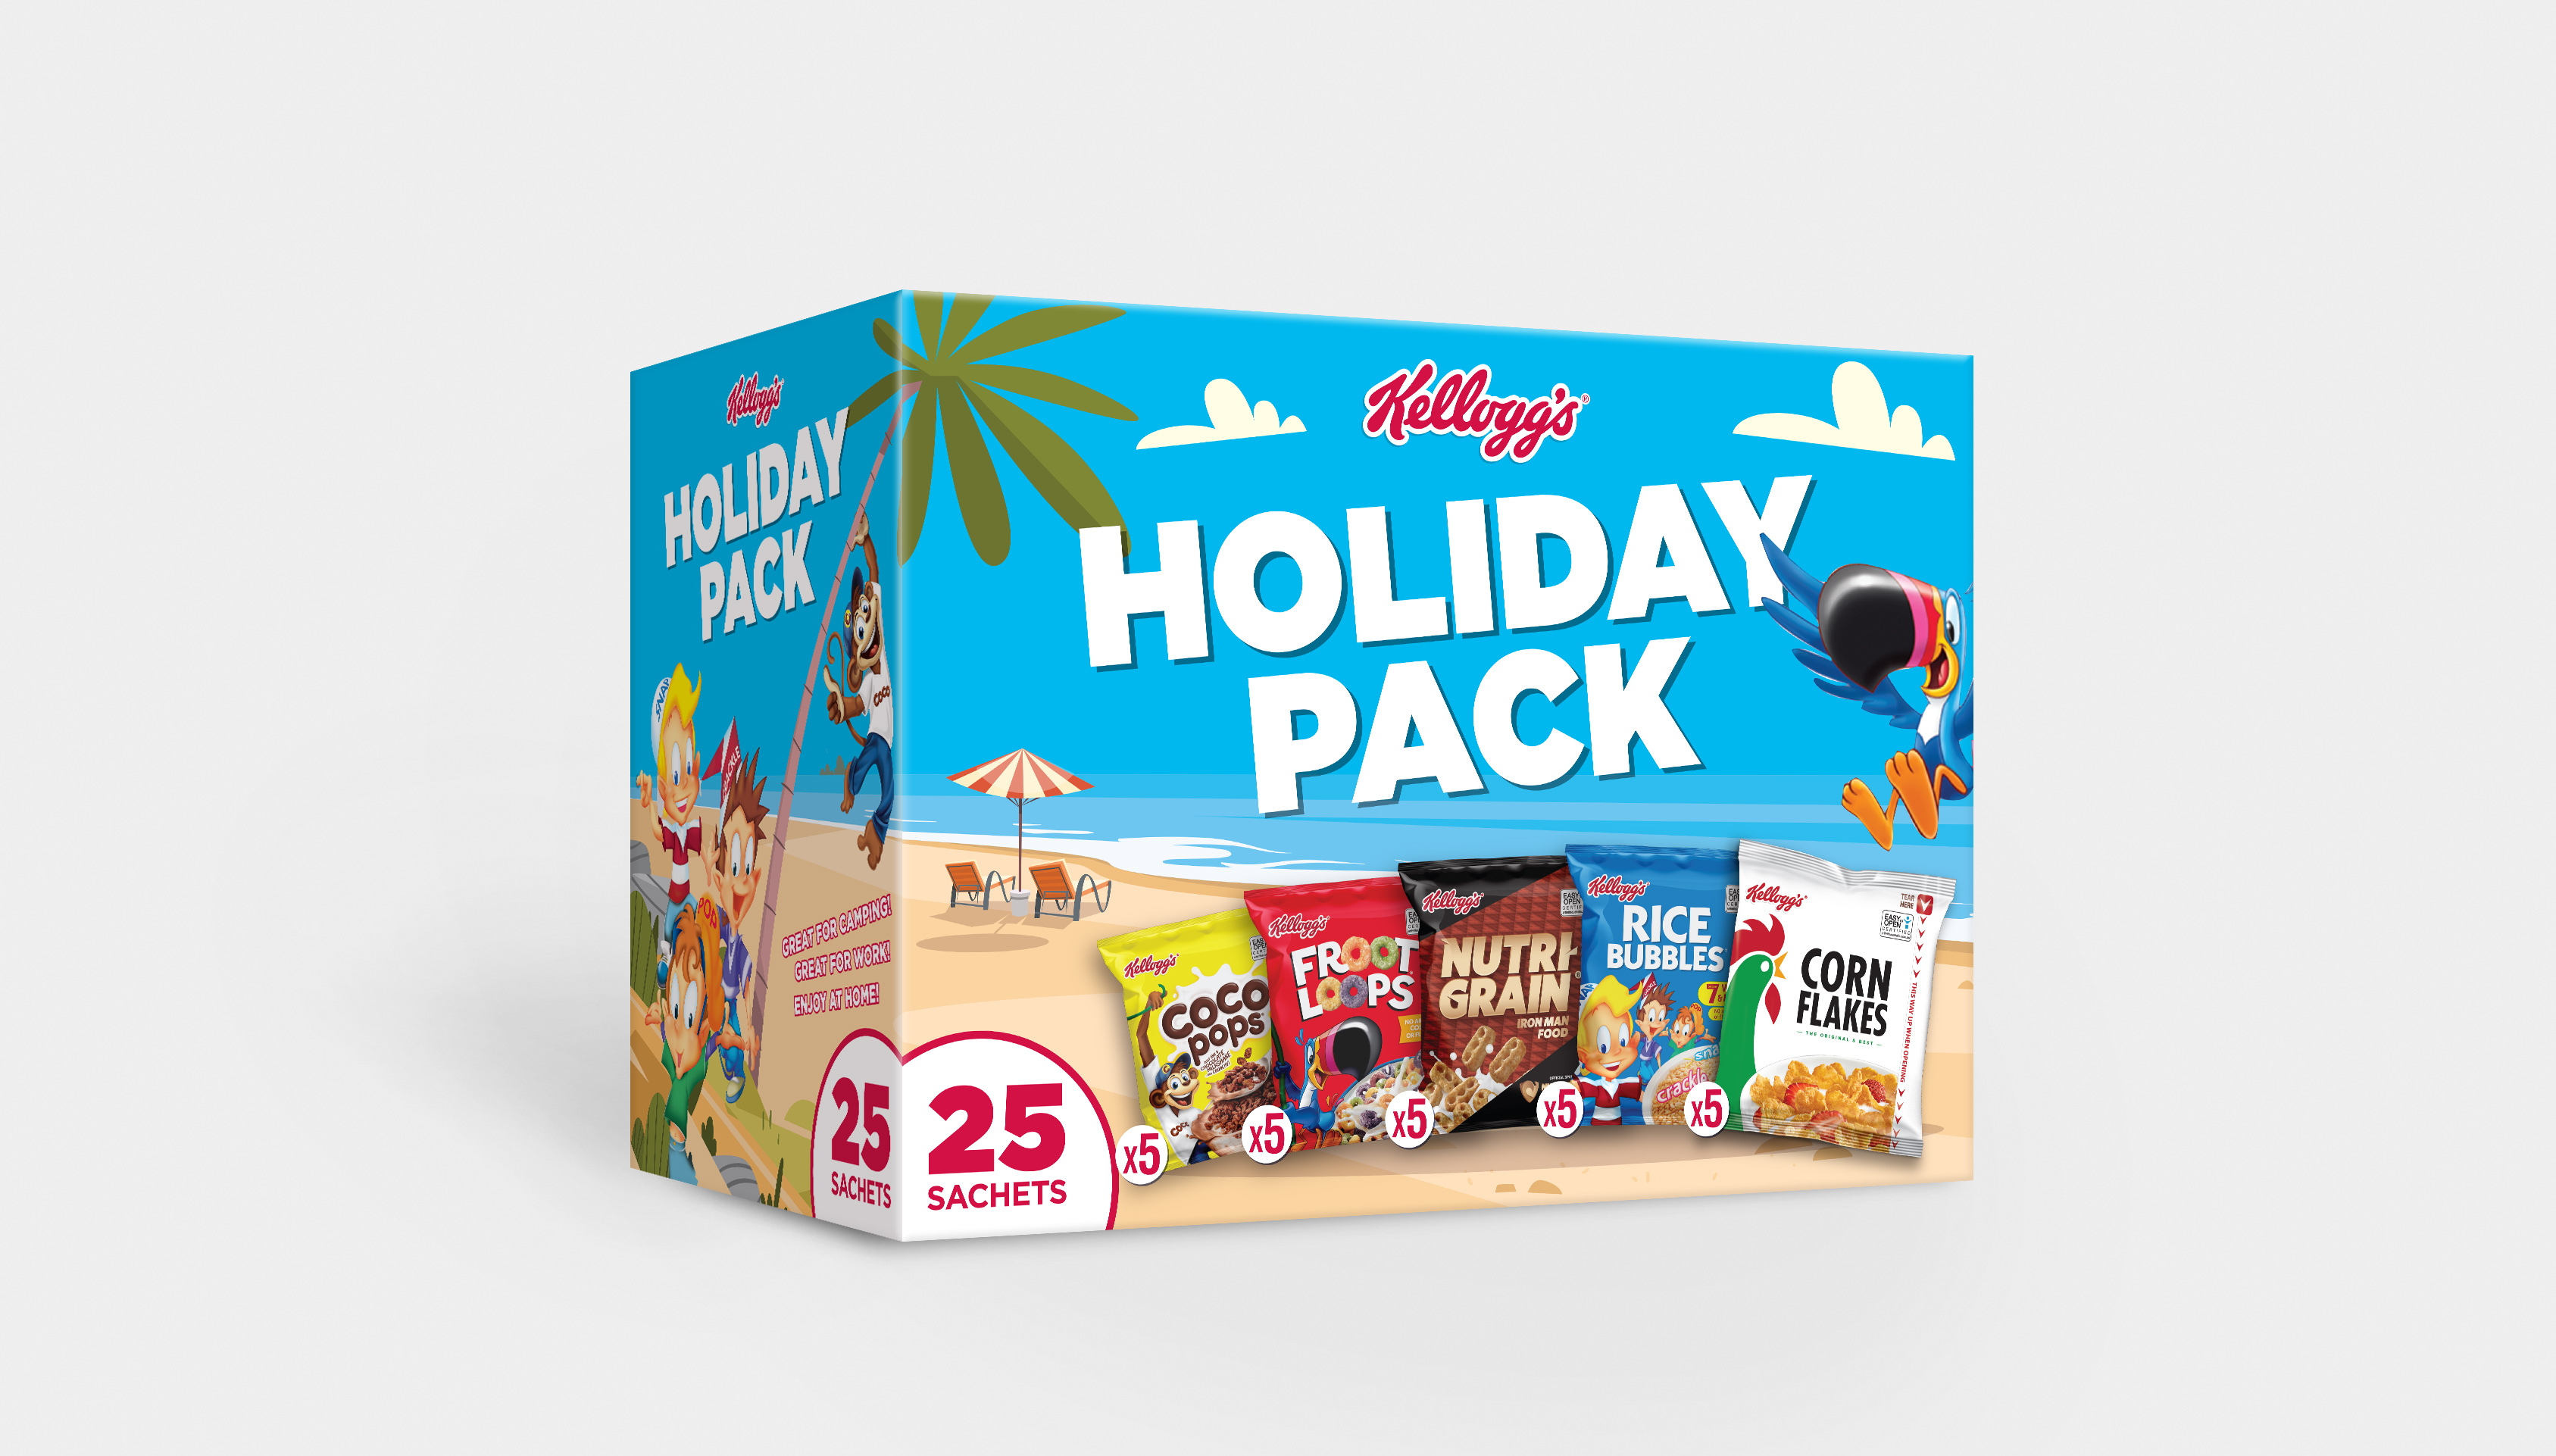 KIHOM_596_Holiday Pack_25 Sachet_Costco_S02_3D